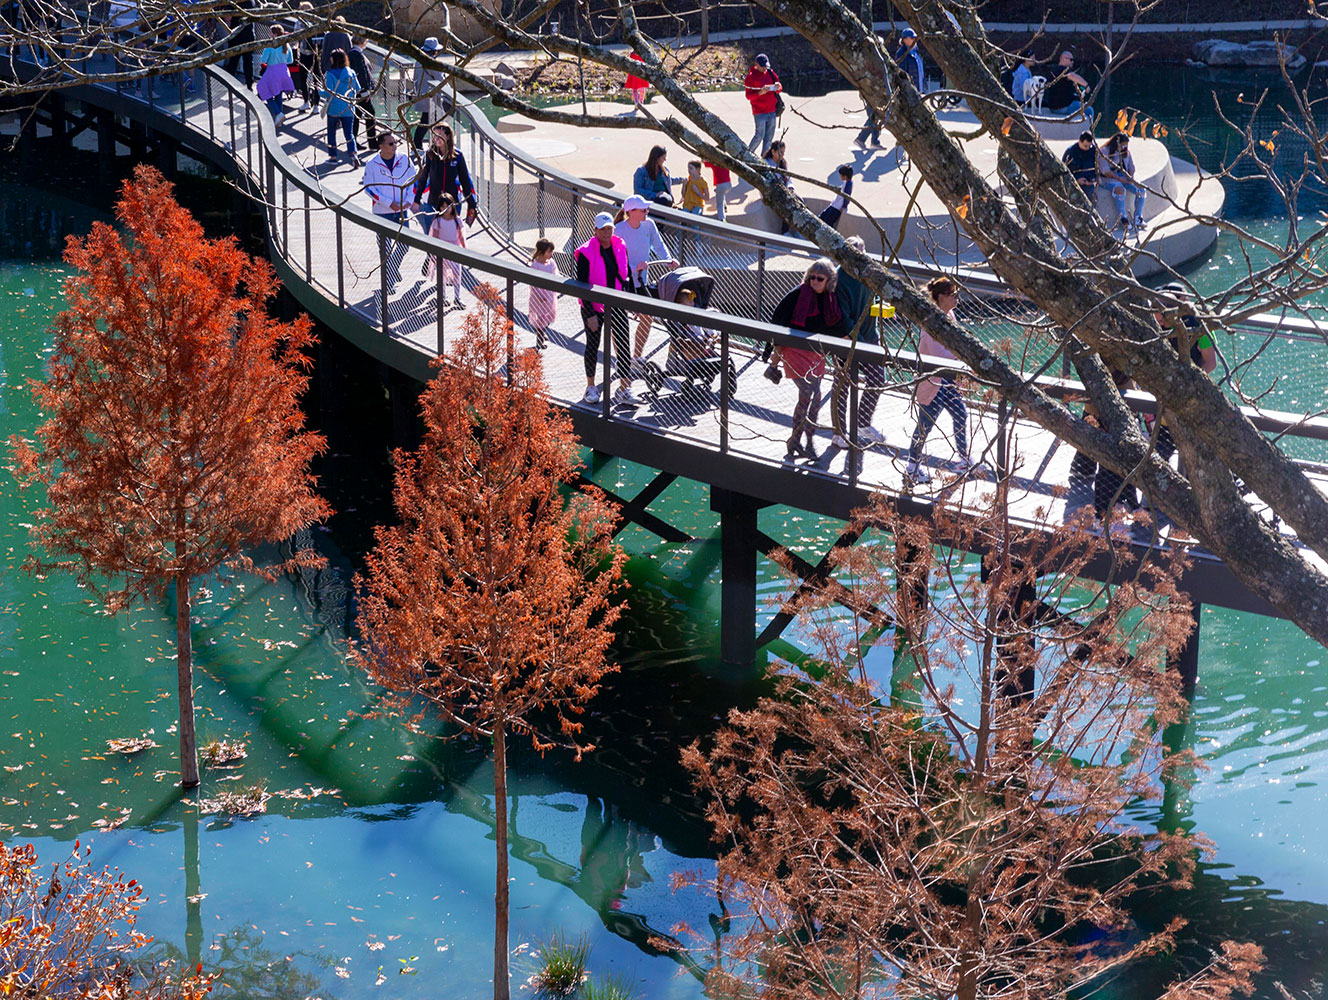 Visitors are lifted up into the tree canopy via the skywalk.